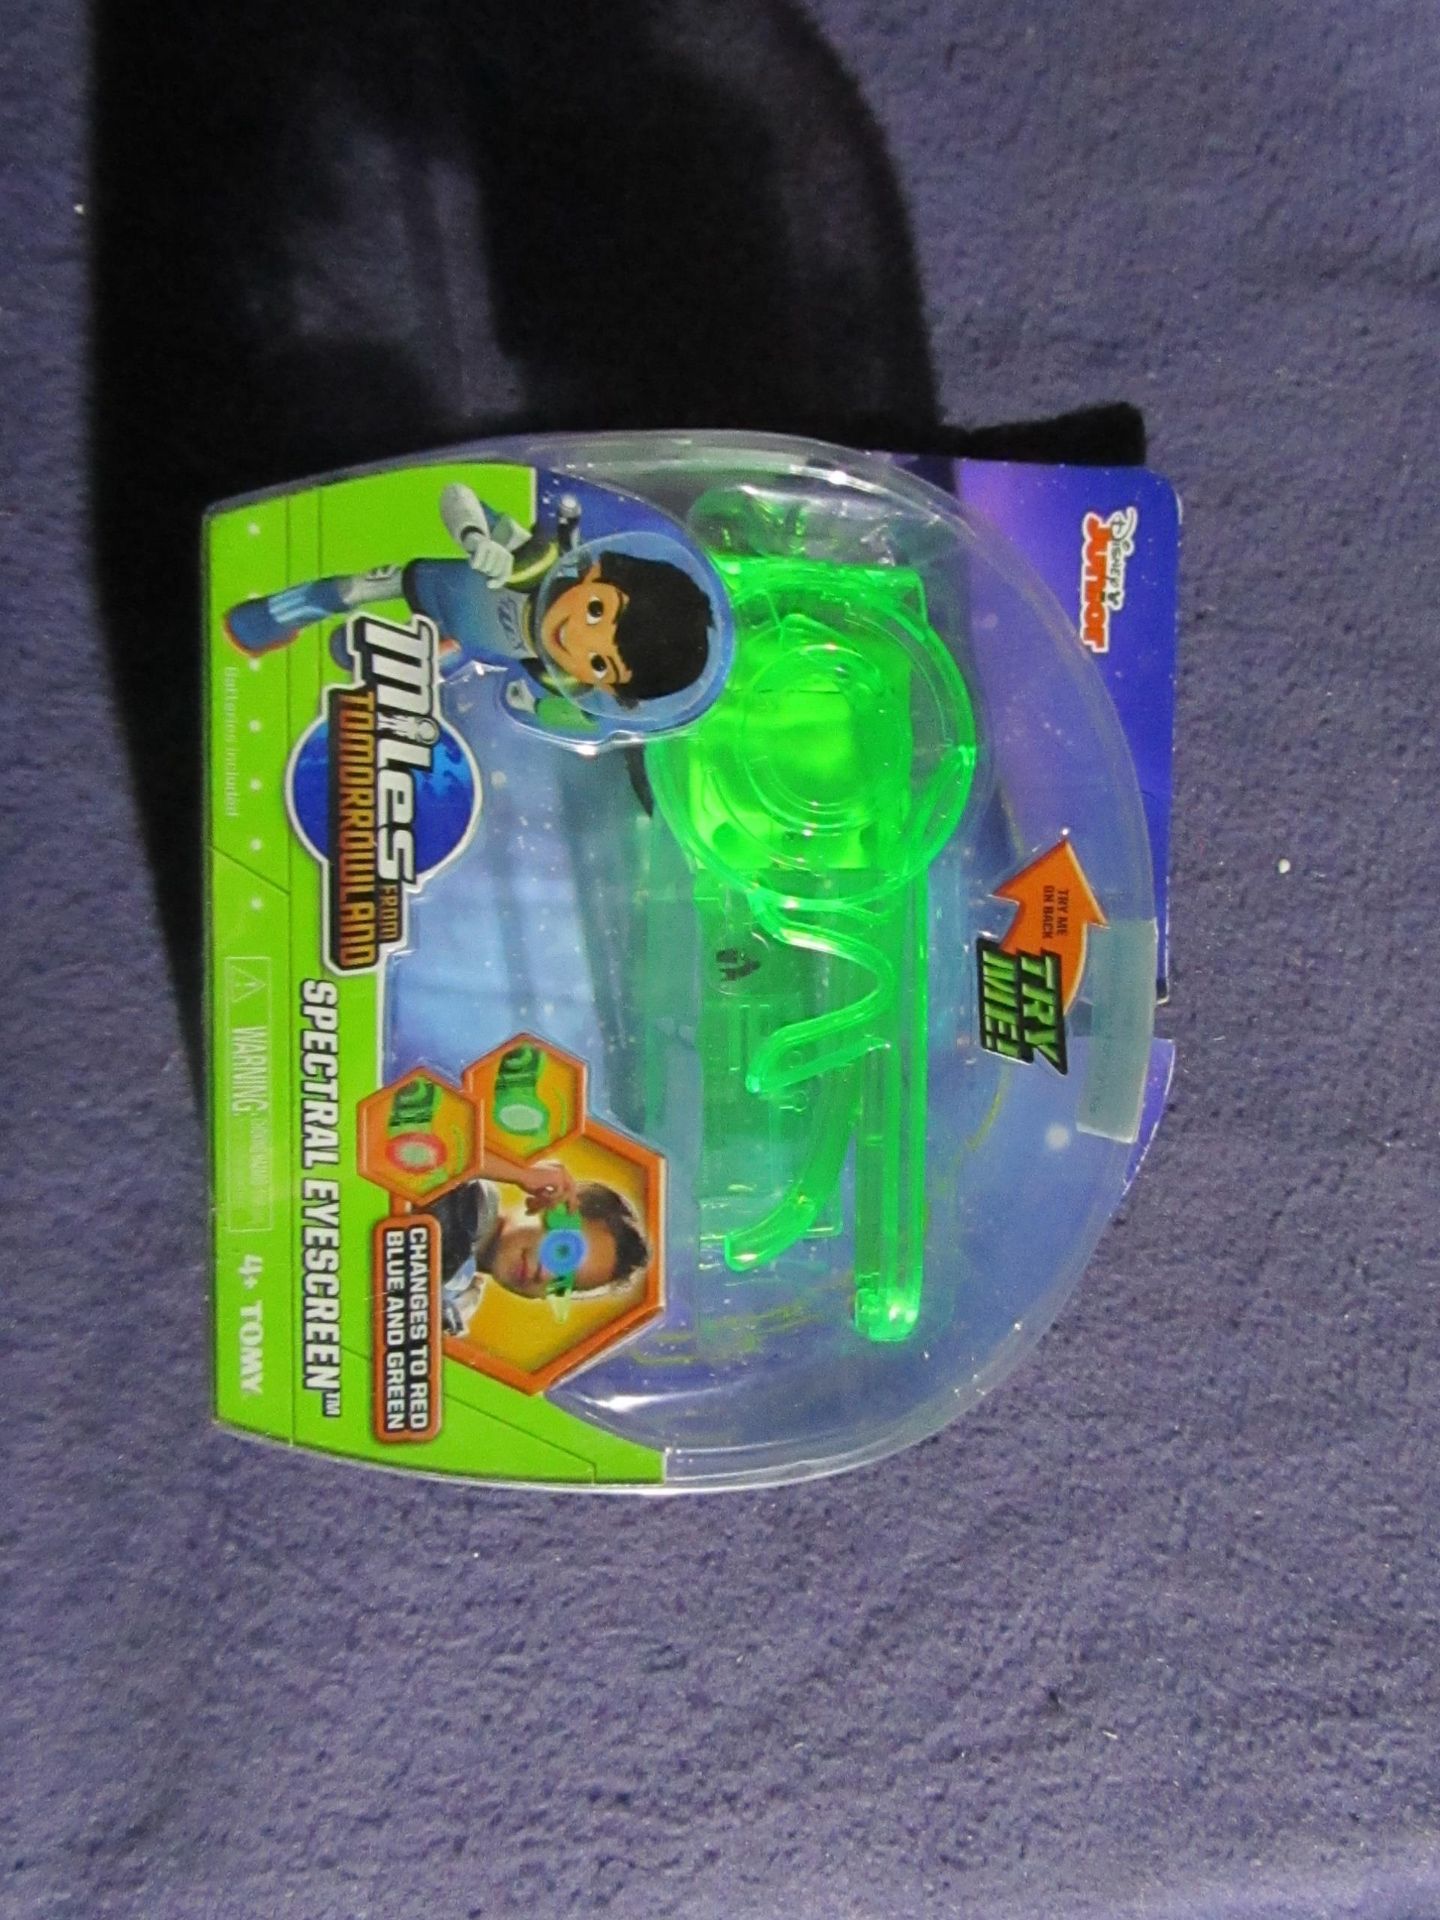 6x Disney Junior - Miles From Tomorrowland Colour-Changing Spectral Eyescreen - Unused & Packaged.